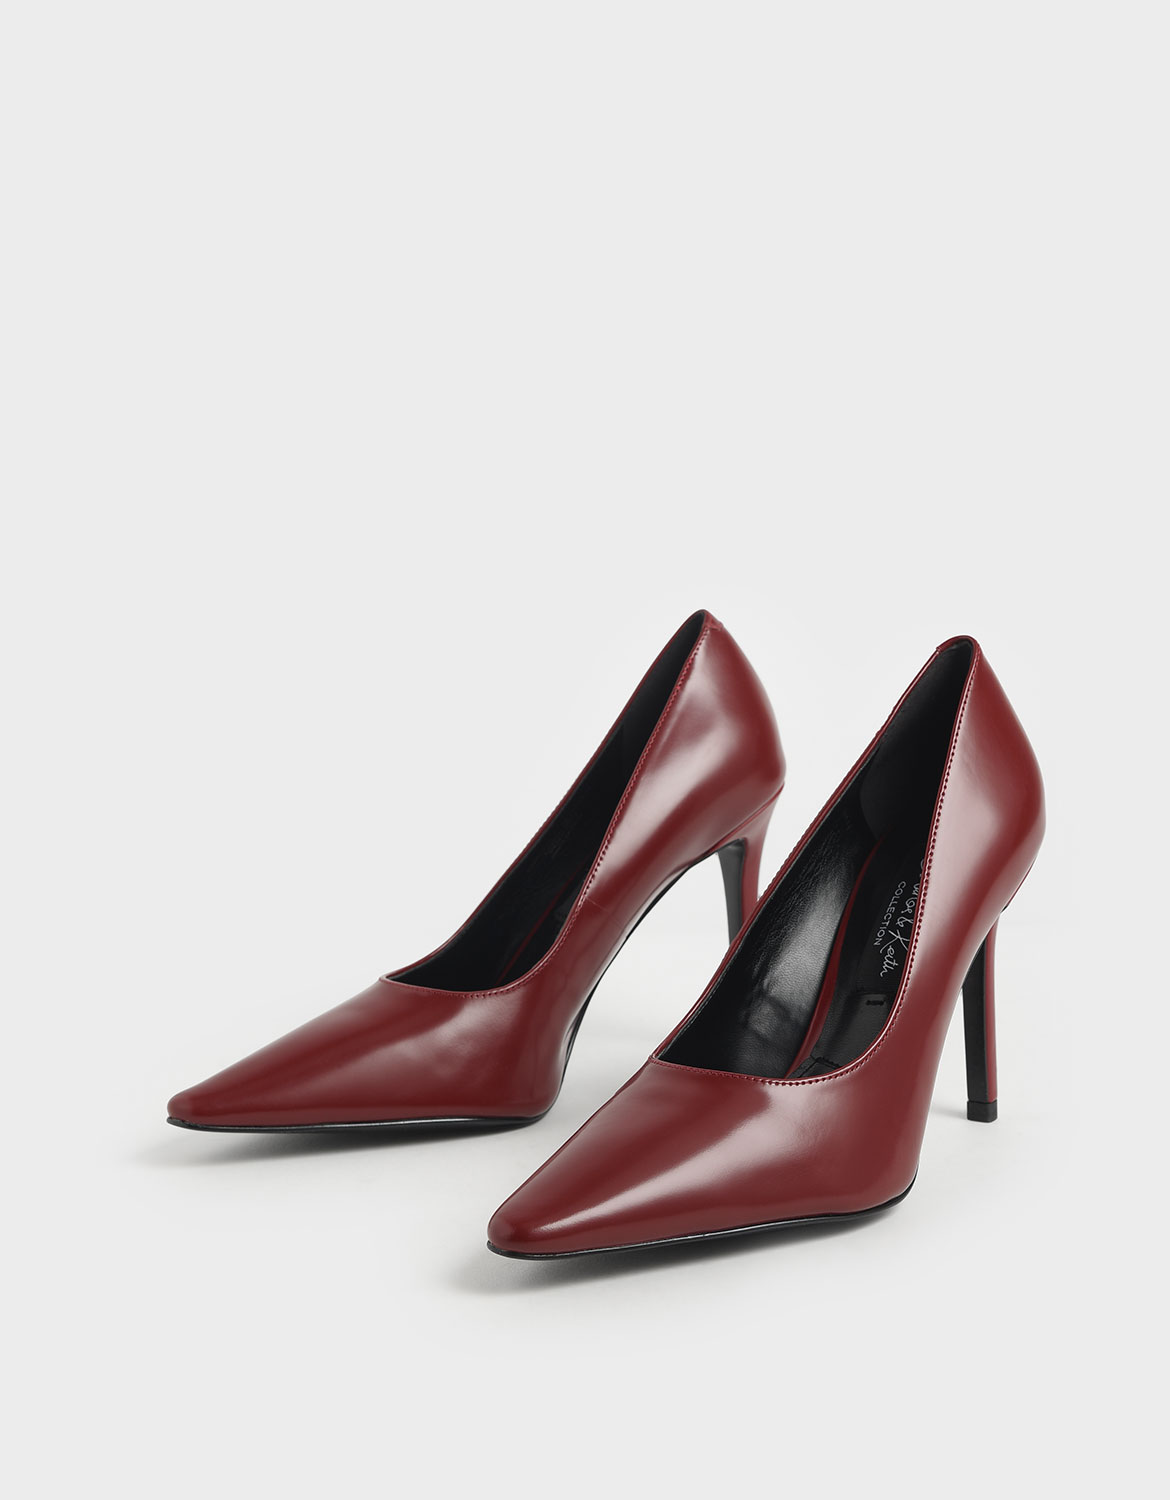 Women’s red leather stiletto pumps – CHARLES & KEITH